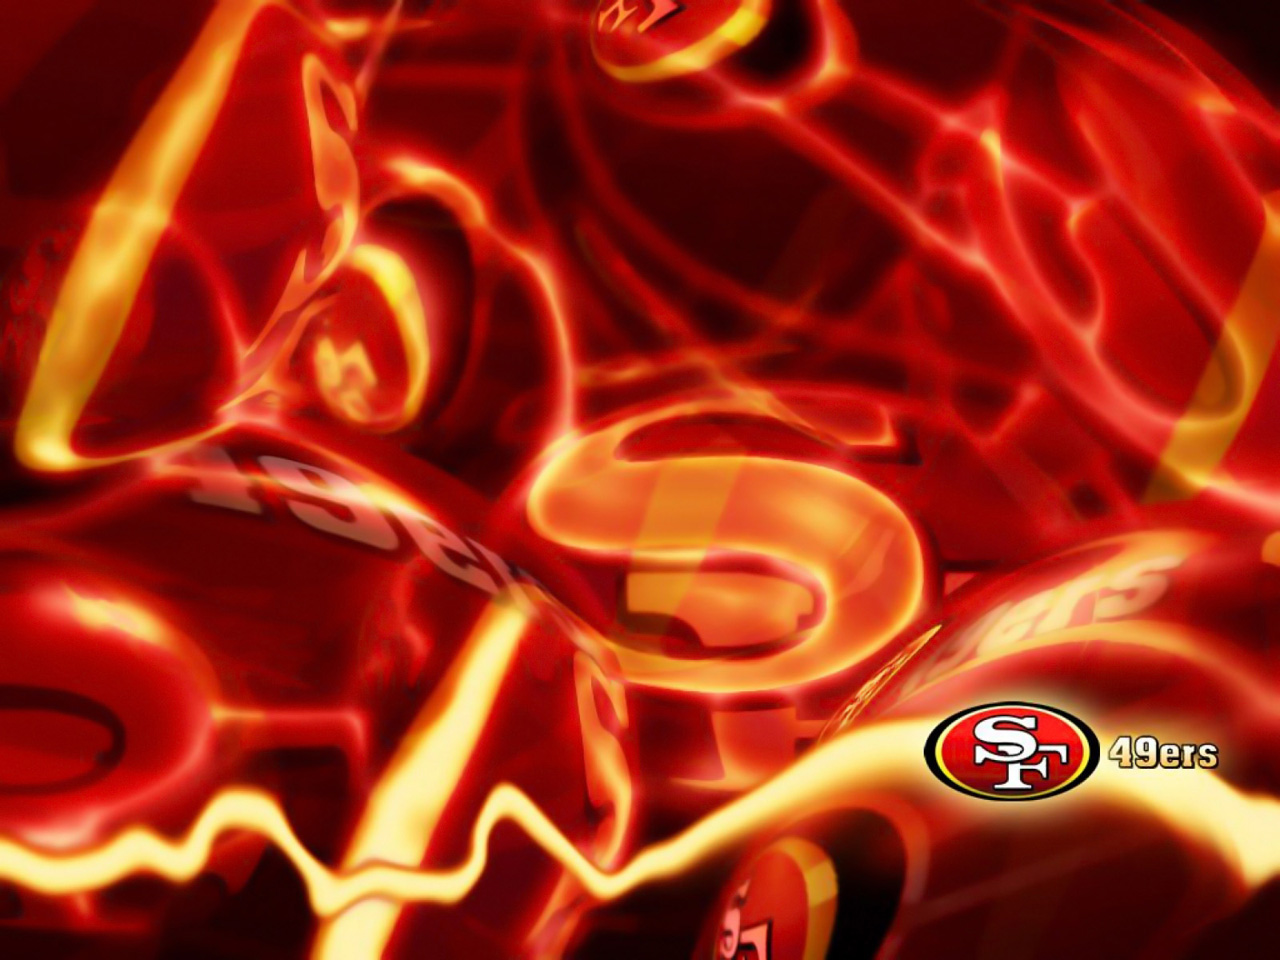 this San Francisco 49ers wallpaper background San Francisco 49ers